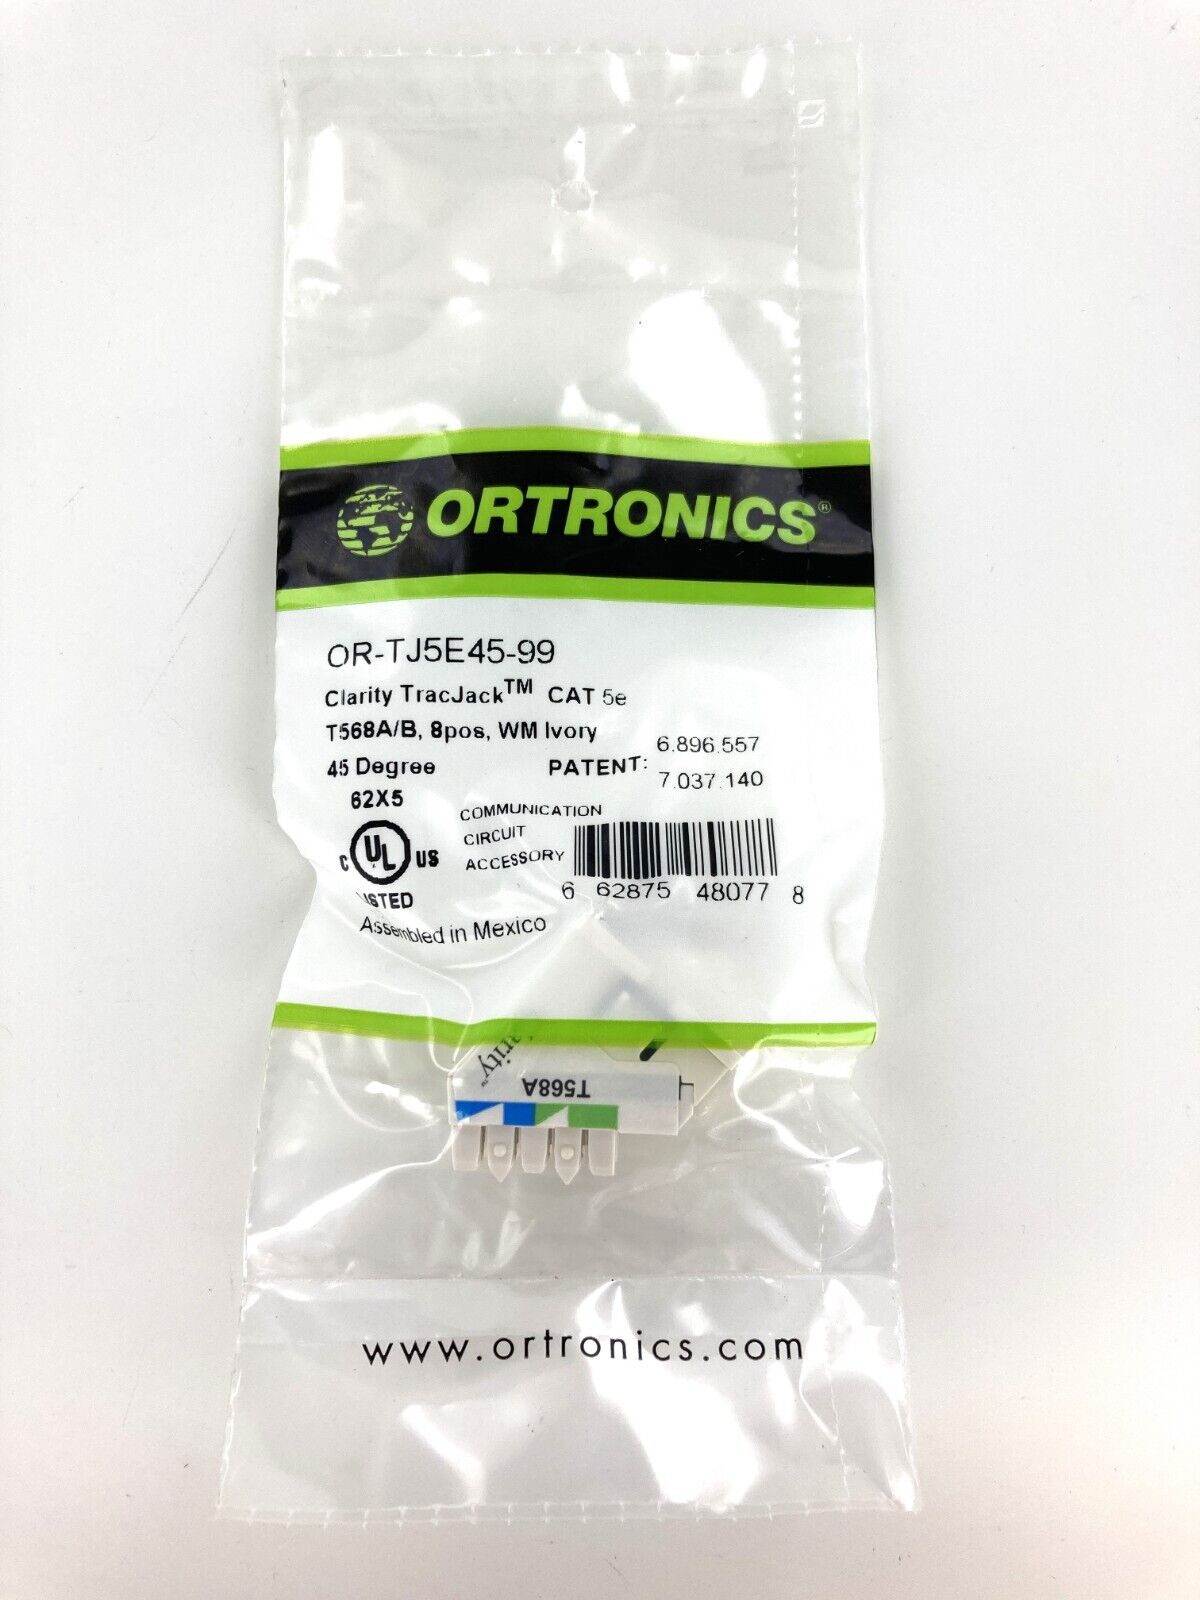 Ortronics OR-TJ5E45-99 Clarity TracJack, Cat5e, 45 Degree, Wiremold Ivory